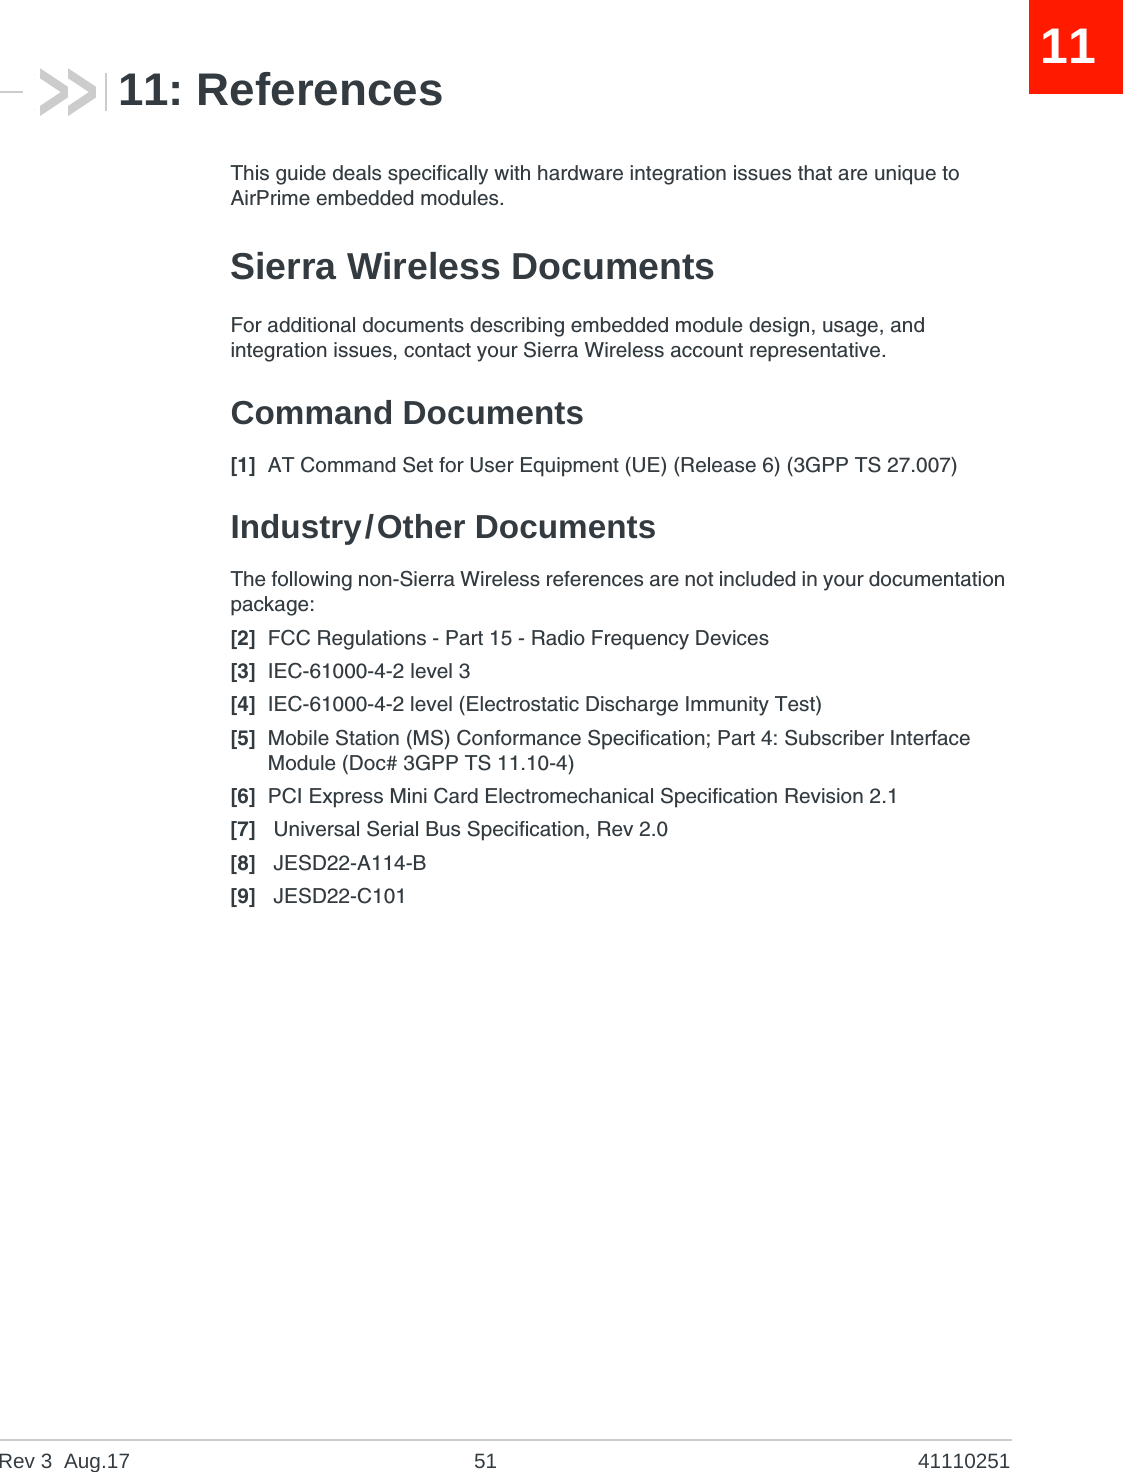 Rev 3  Aug.17 51 411102511111: ReferencesThis guide deals specifically with hardware integration issues that are unique to AirPrime embedded modules.Sierra Wireless DocumentsFor additional documents describing embedded module design, usage, and integration issues, contact your Sierra Wireless account representative.Command Documents[1] AT Command Set for User Equipment (UE) (Release 6) (3GPP TS 27.007)Industry/Other DocumentsThe following non-Sierra Wireless references are not included in your documentation package:[2] FCC Regulations - Part 15 - Radio Frequency Devices[3] IEC-61000-4-2 level 3[4] IEC-61000-4-2 level (Electrostatic Discharge Immunity Test)[5] Mobile Station (MS) Conformance Specification; Part 4: Subscriber Interface Module (Doc# 3GPP TS 11.10-4)[6] PCI Express Mini Card Electromechanical Specification Revision 2.1[7]  Universal Serial Bus Specification, Rev 2.0[8]  JESD22-A114-B[9]  JESD22-C101